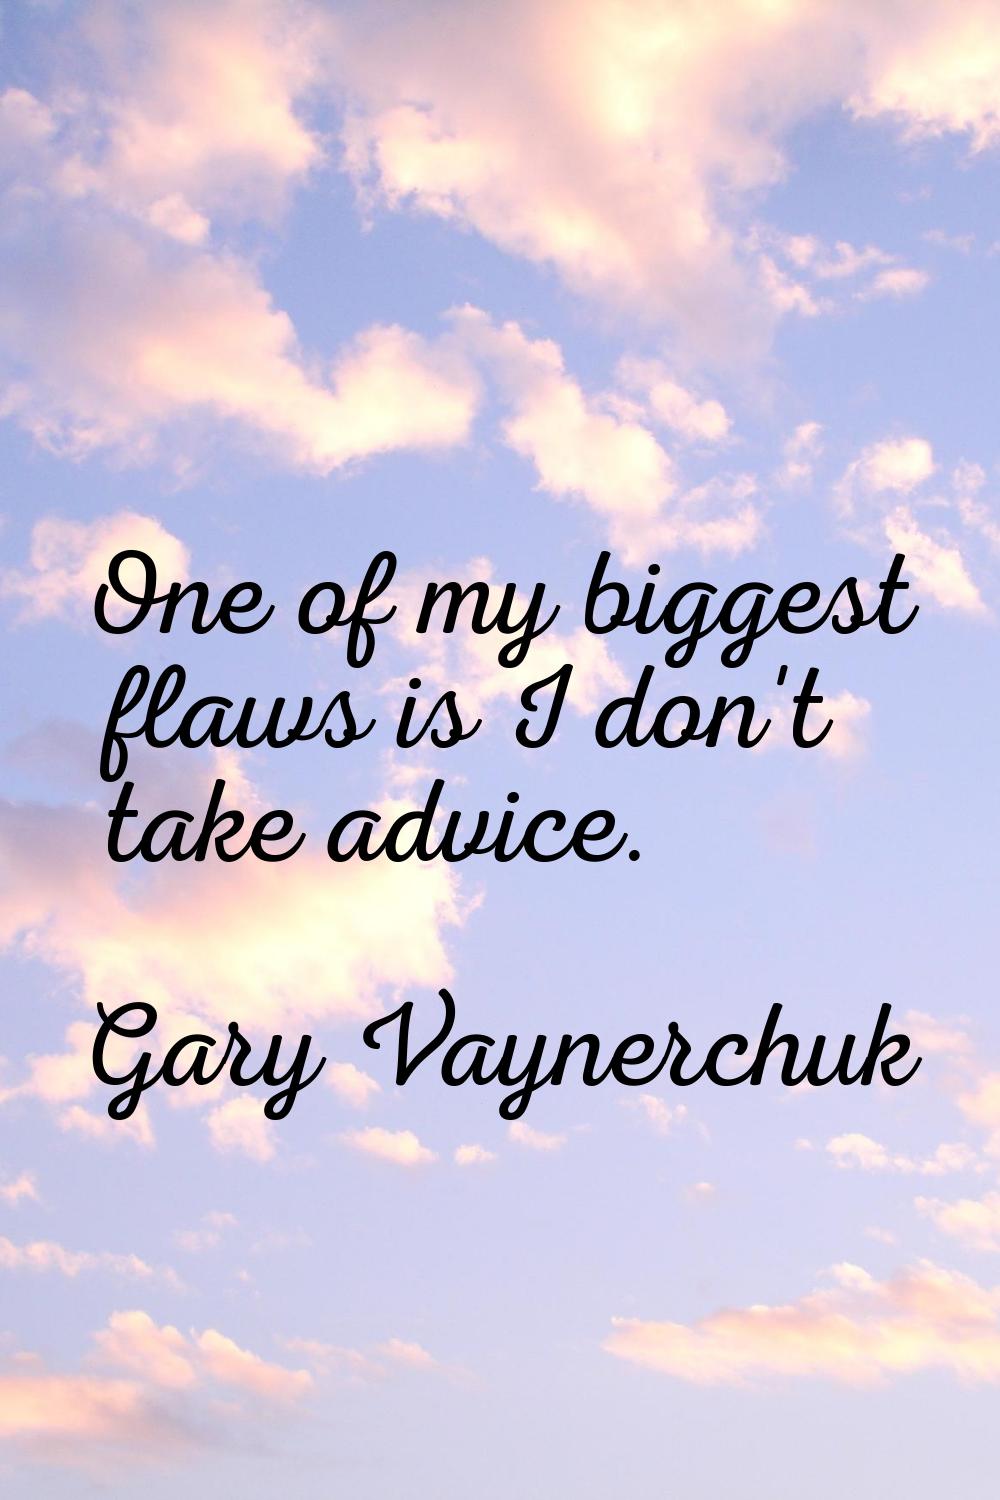 One of my biggest flaws is I don't take advice.